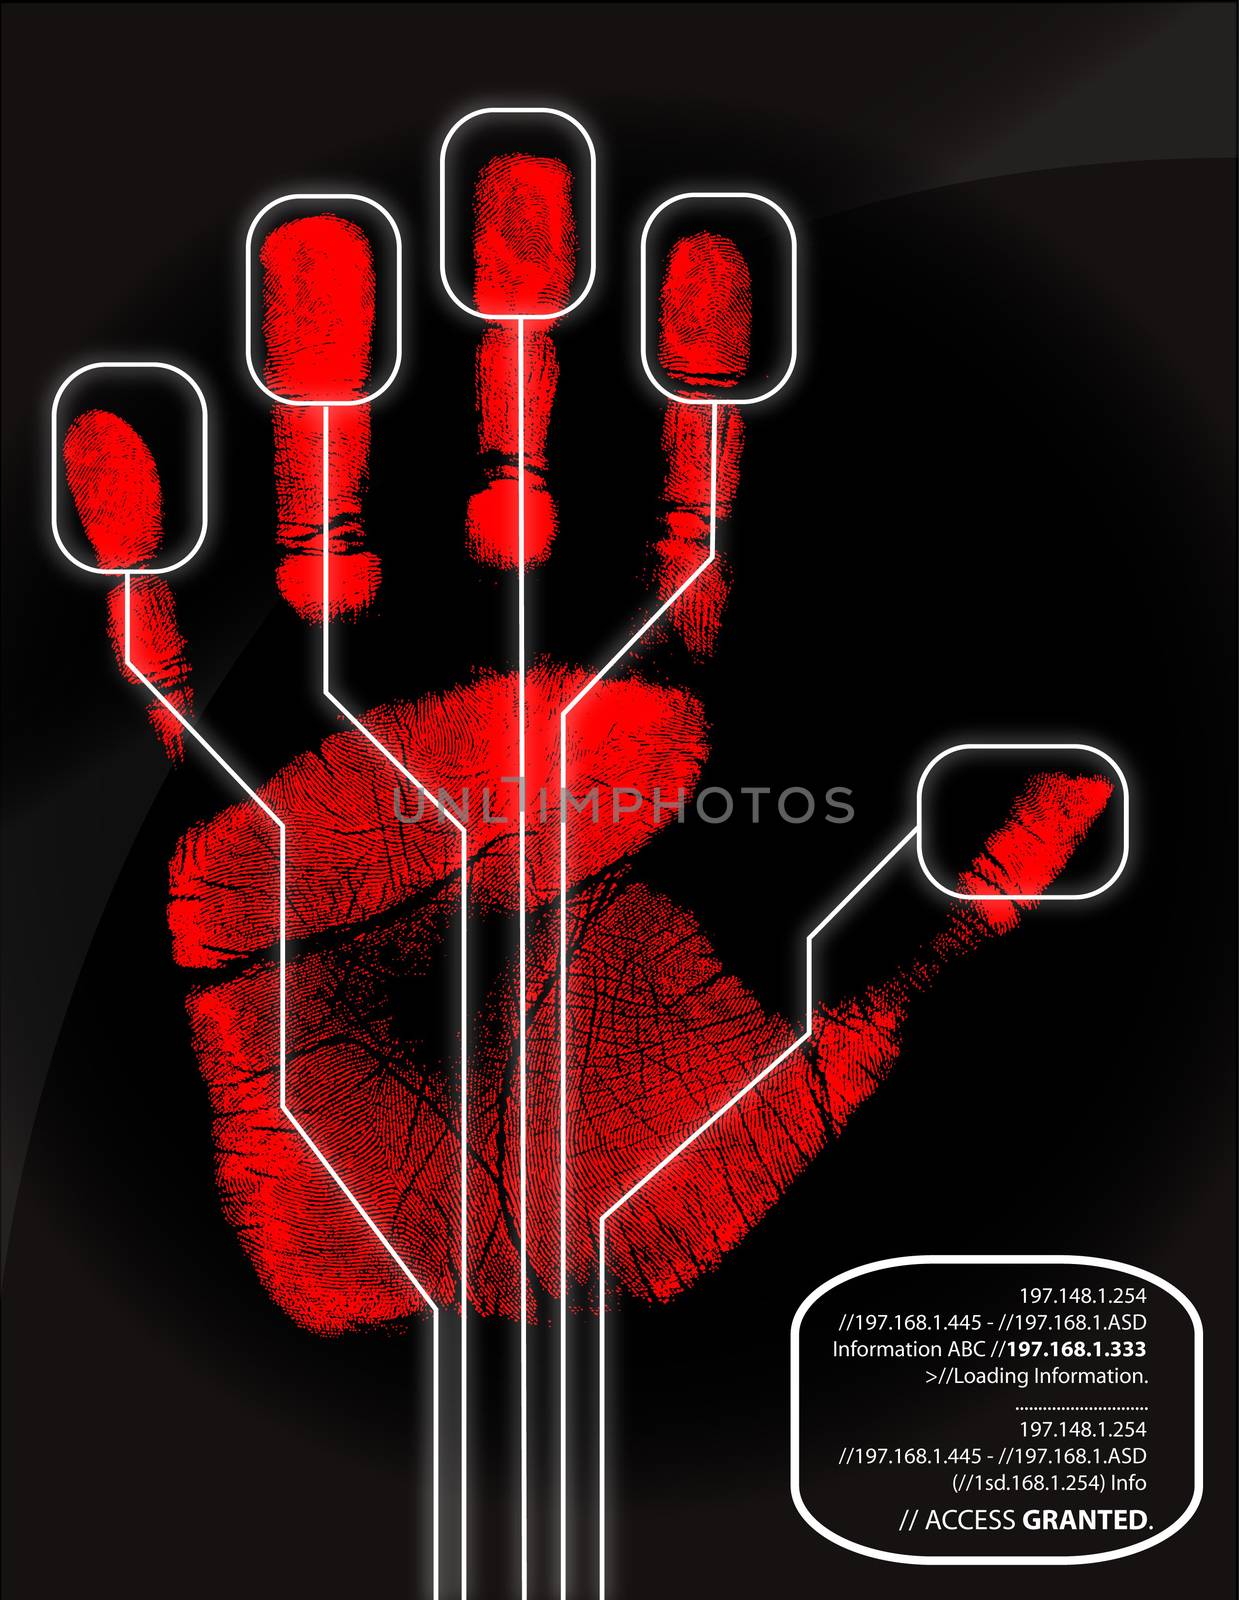 Hand being scanned before access is granted.